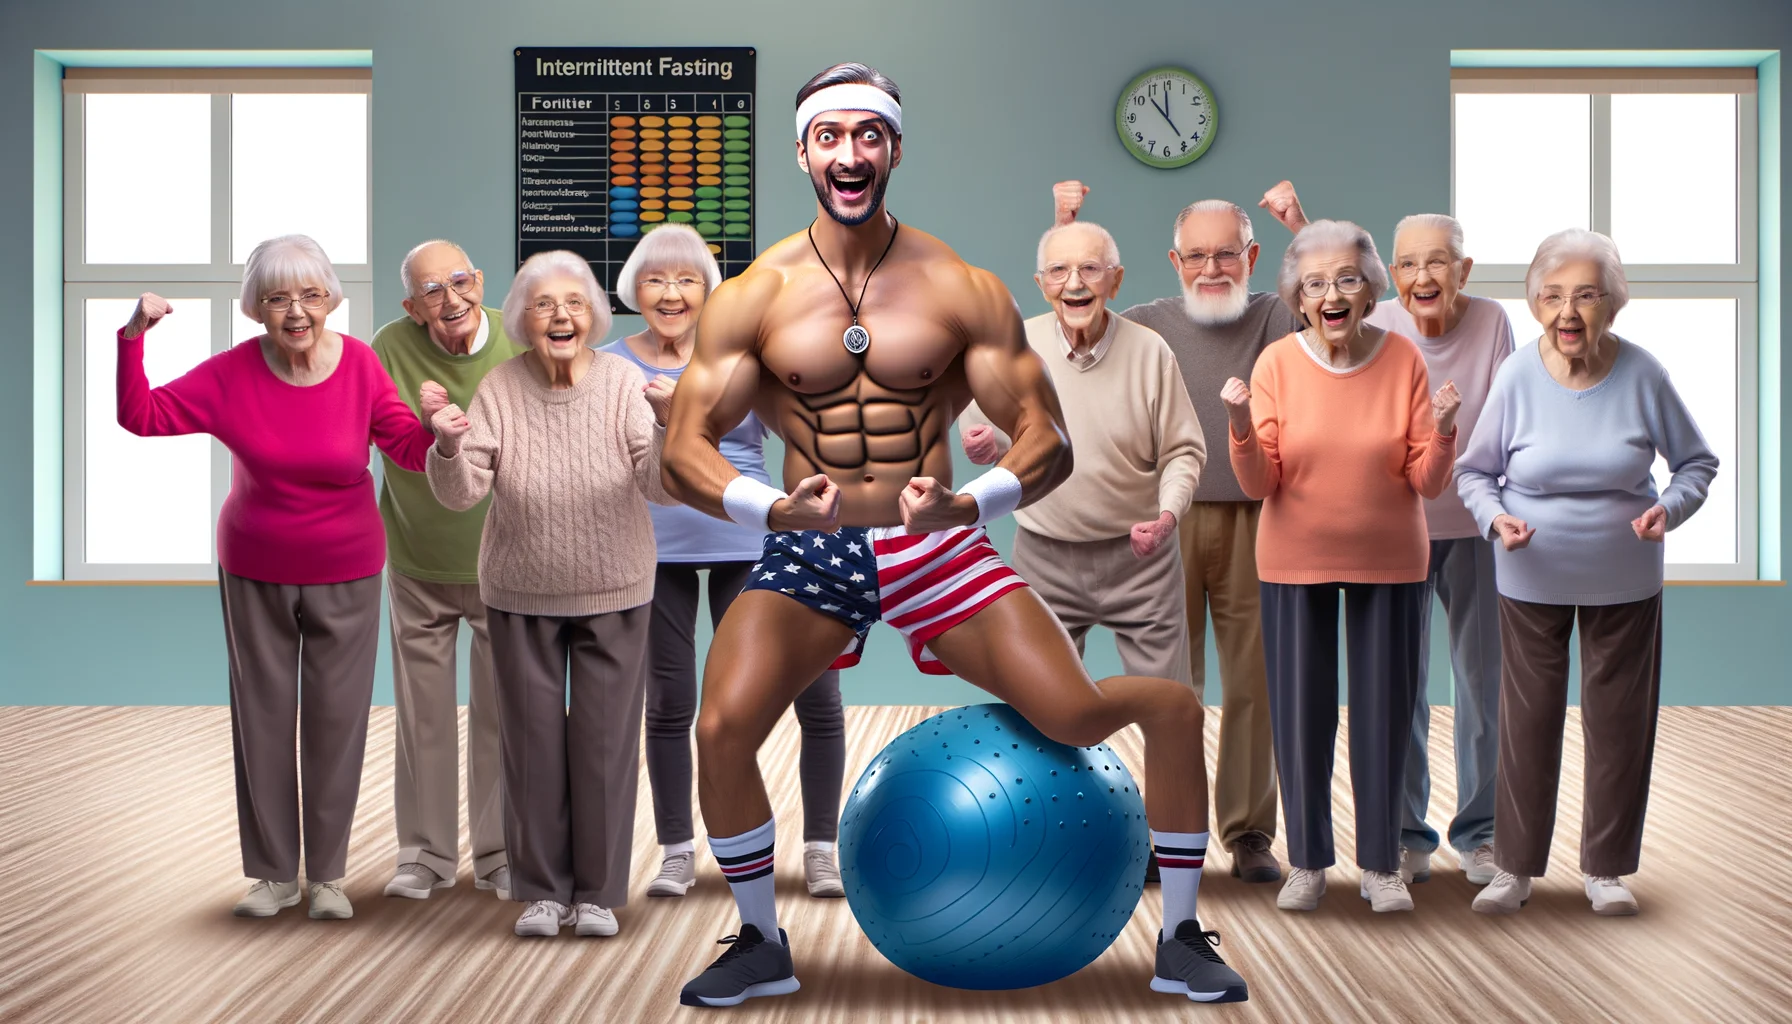 Craft an amusing image featuring a recognizable fitness expert, known for his intermittent fasting program, placed in a humorous situation with regard to seniors and nutritional plans. He can be illustrated conducting an unusual exercise class for a lively group of elderly individuals of diverse descents, or maybe explaining the benefits of different foods in a fun, exaggerated way. Age is not a barrier for these seniors, their determined faces glow with vitality and they seem thrilled to learn from the fitness expert.